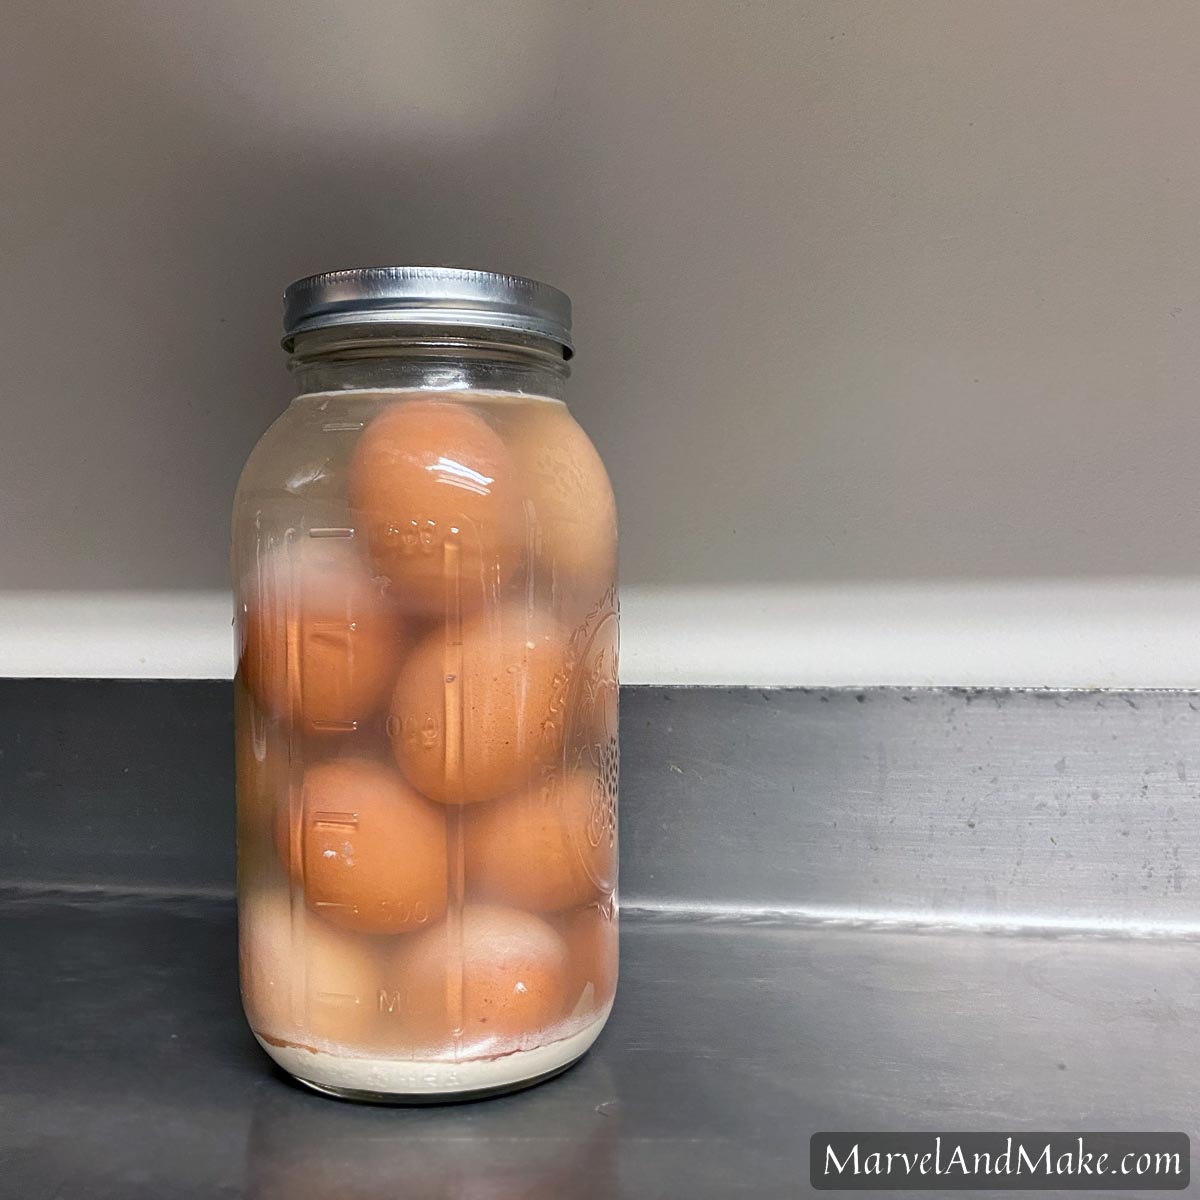 How to preserve raw eggs - water glassed eggs by Marvel & Make at marvelandmake.com